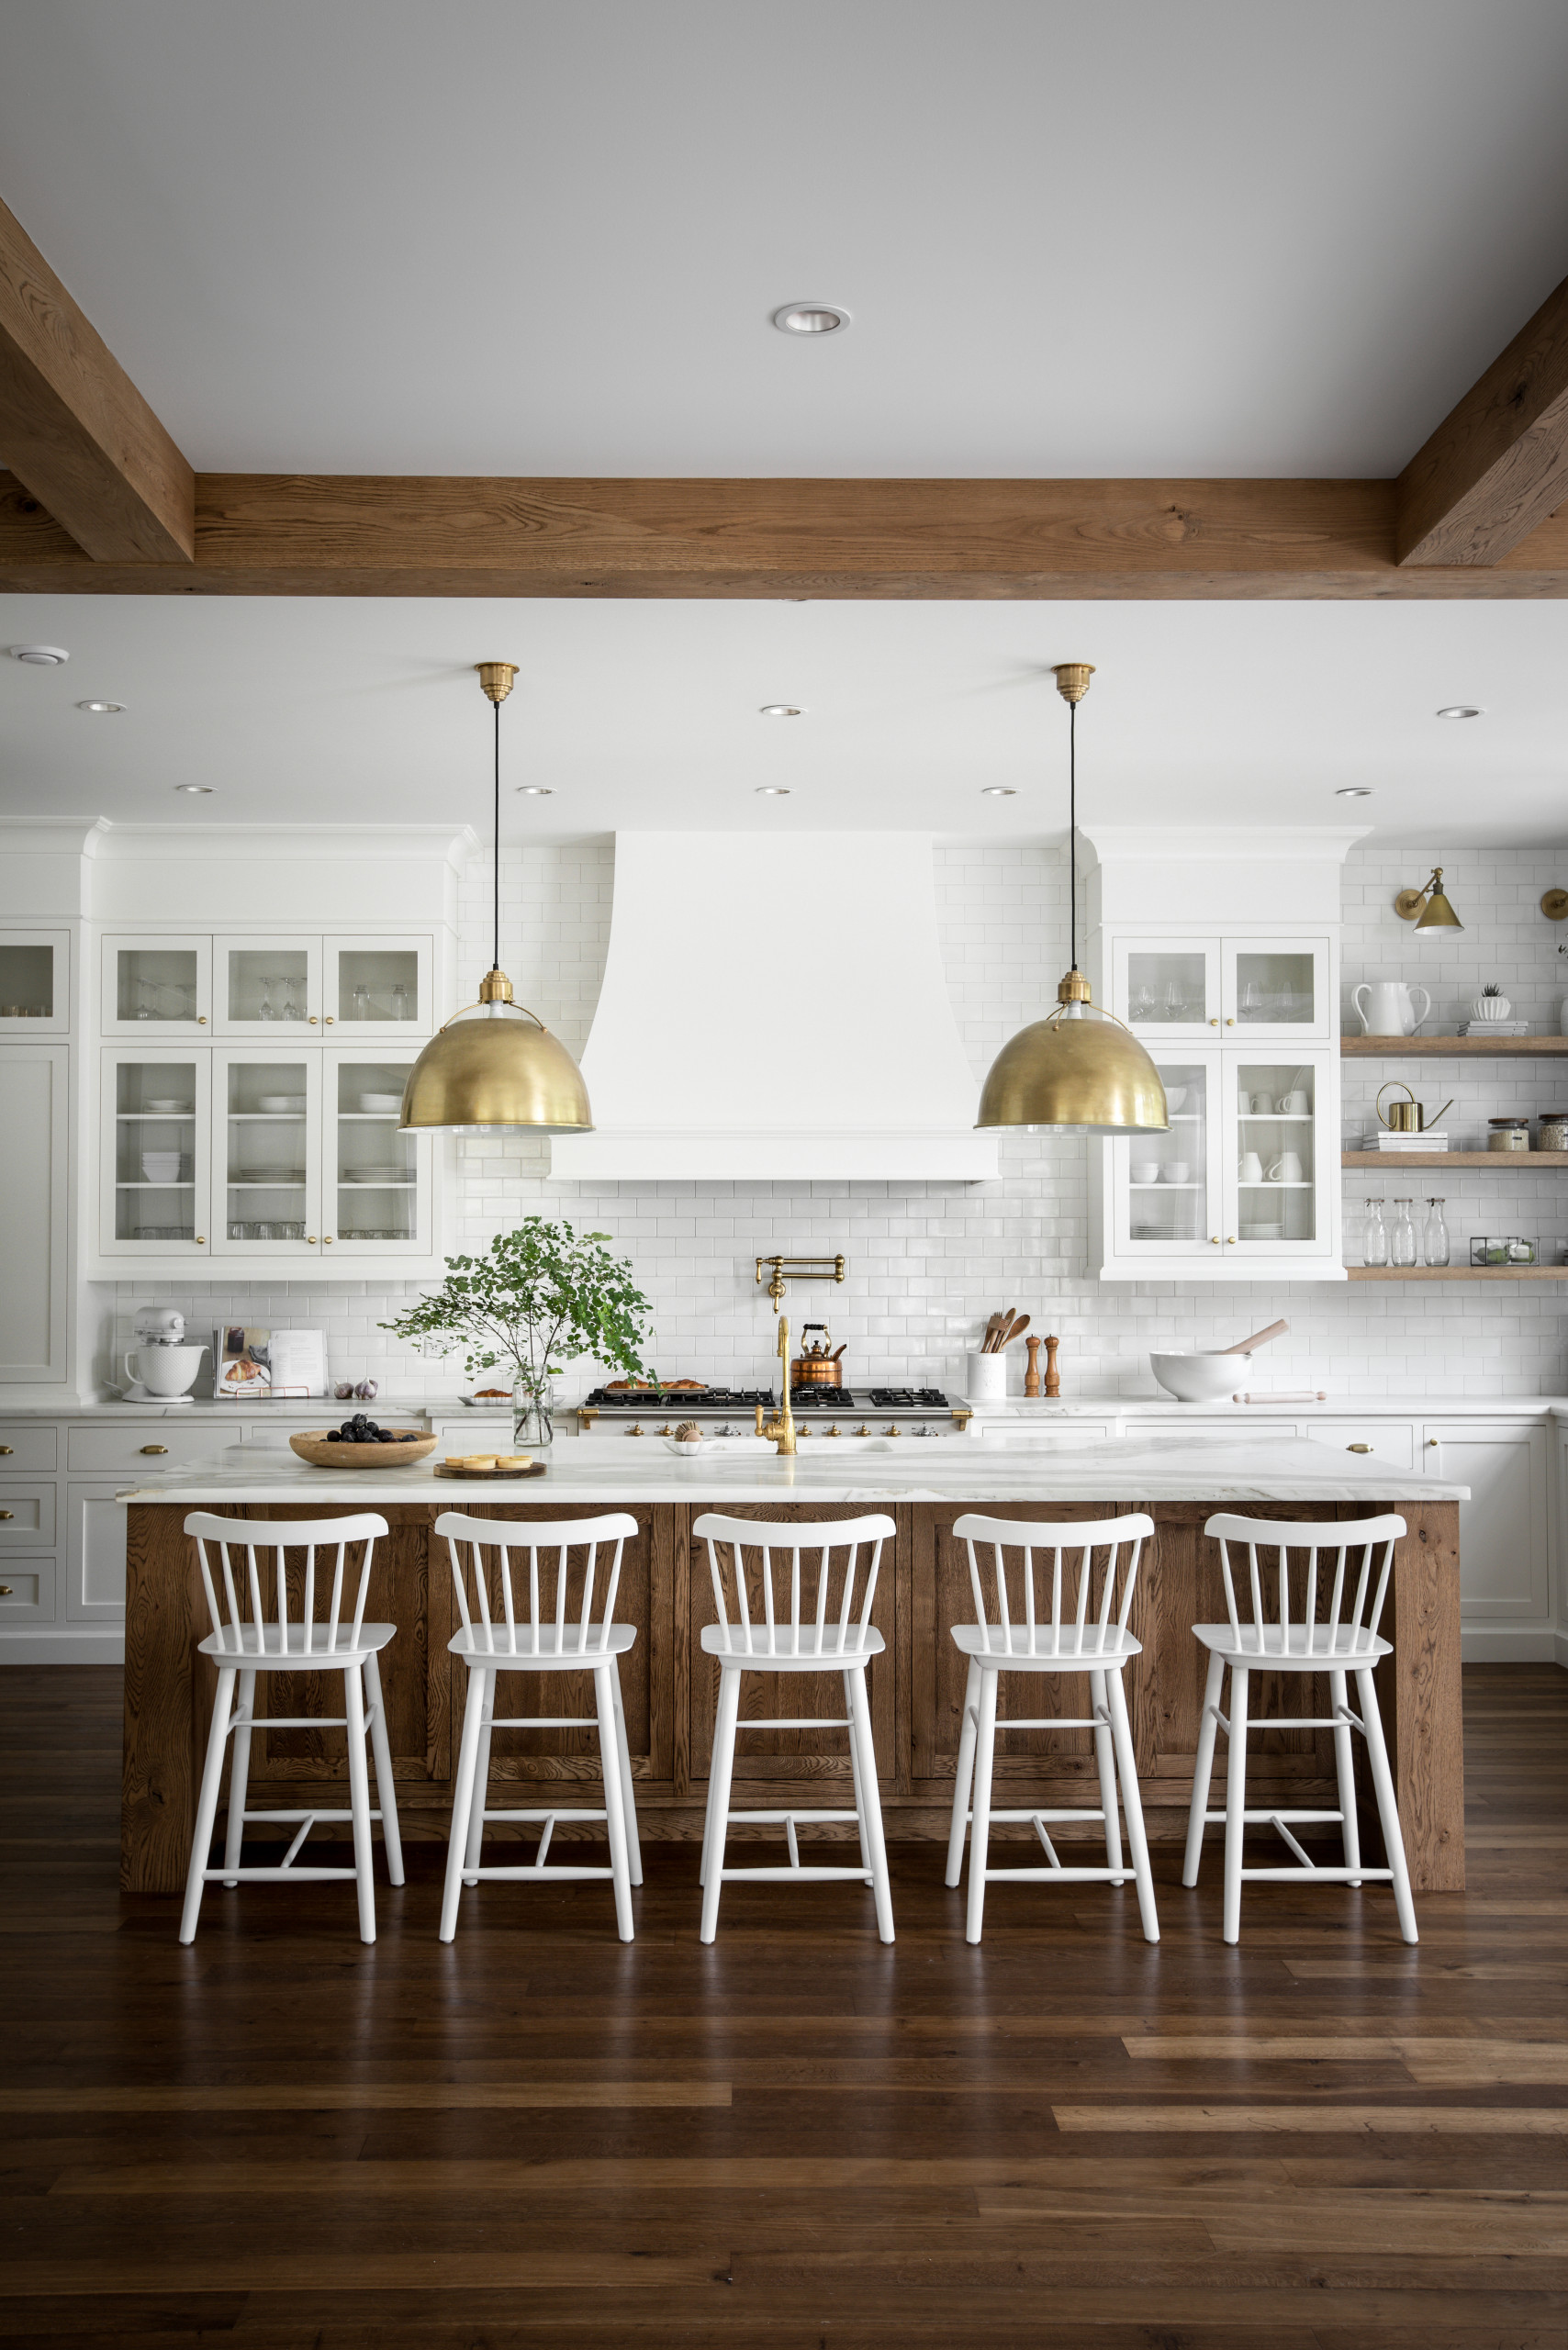 Maison de Lee - French Country - Kitchen - Vancouver - by Jenny Martin  Design | Houzz